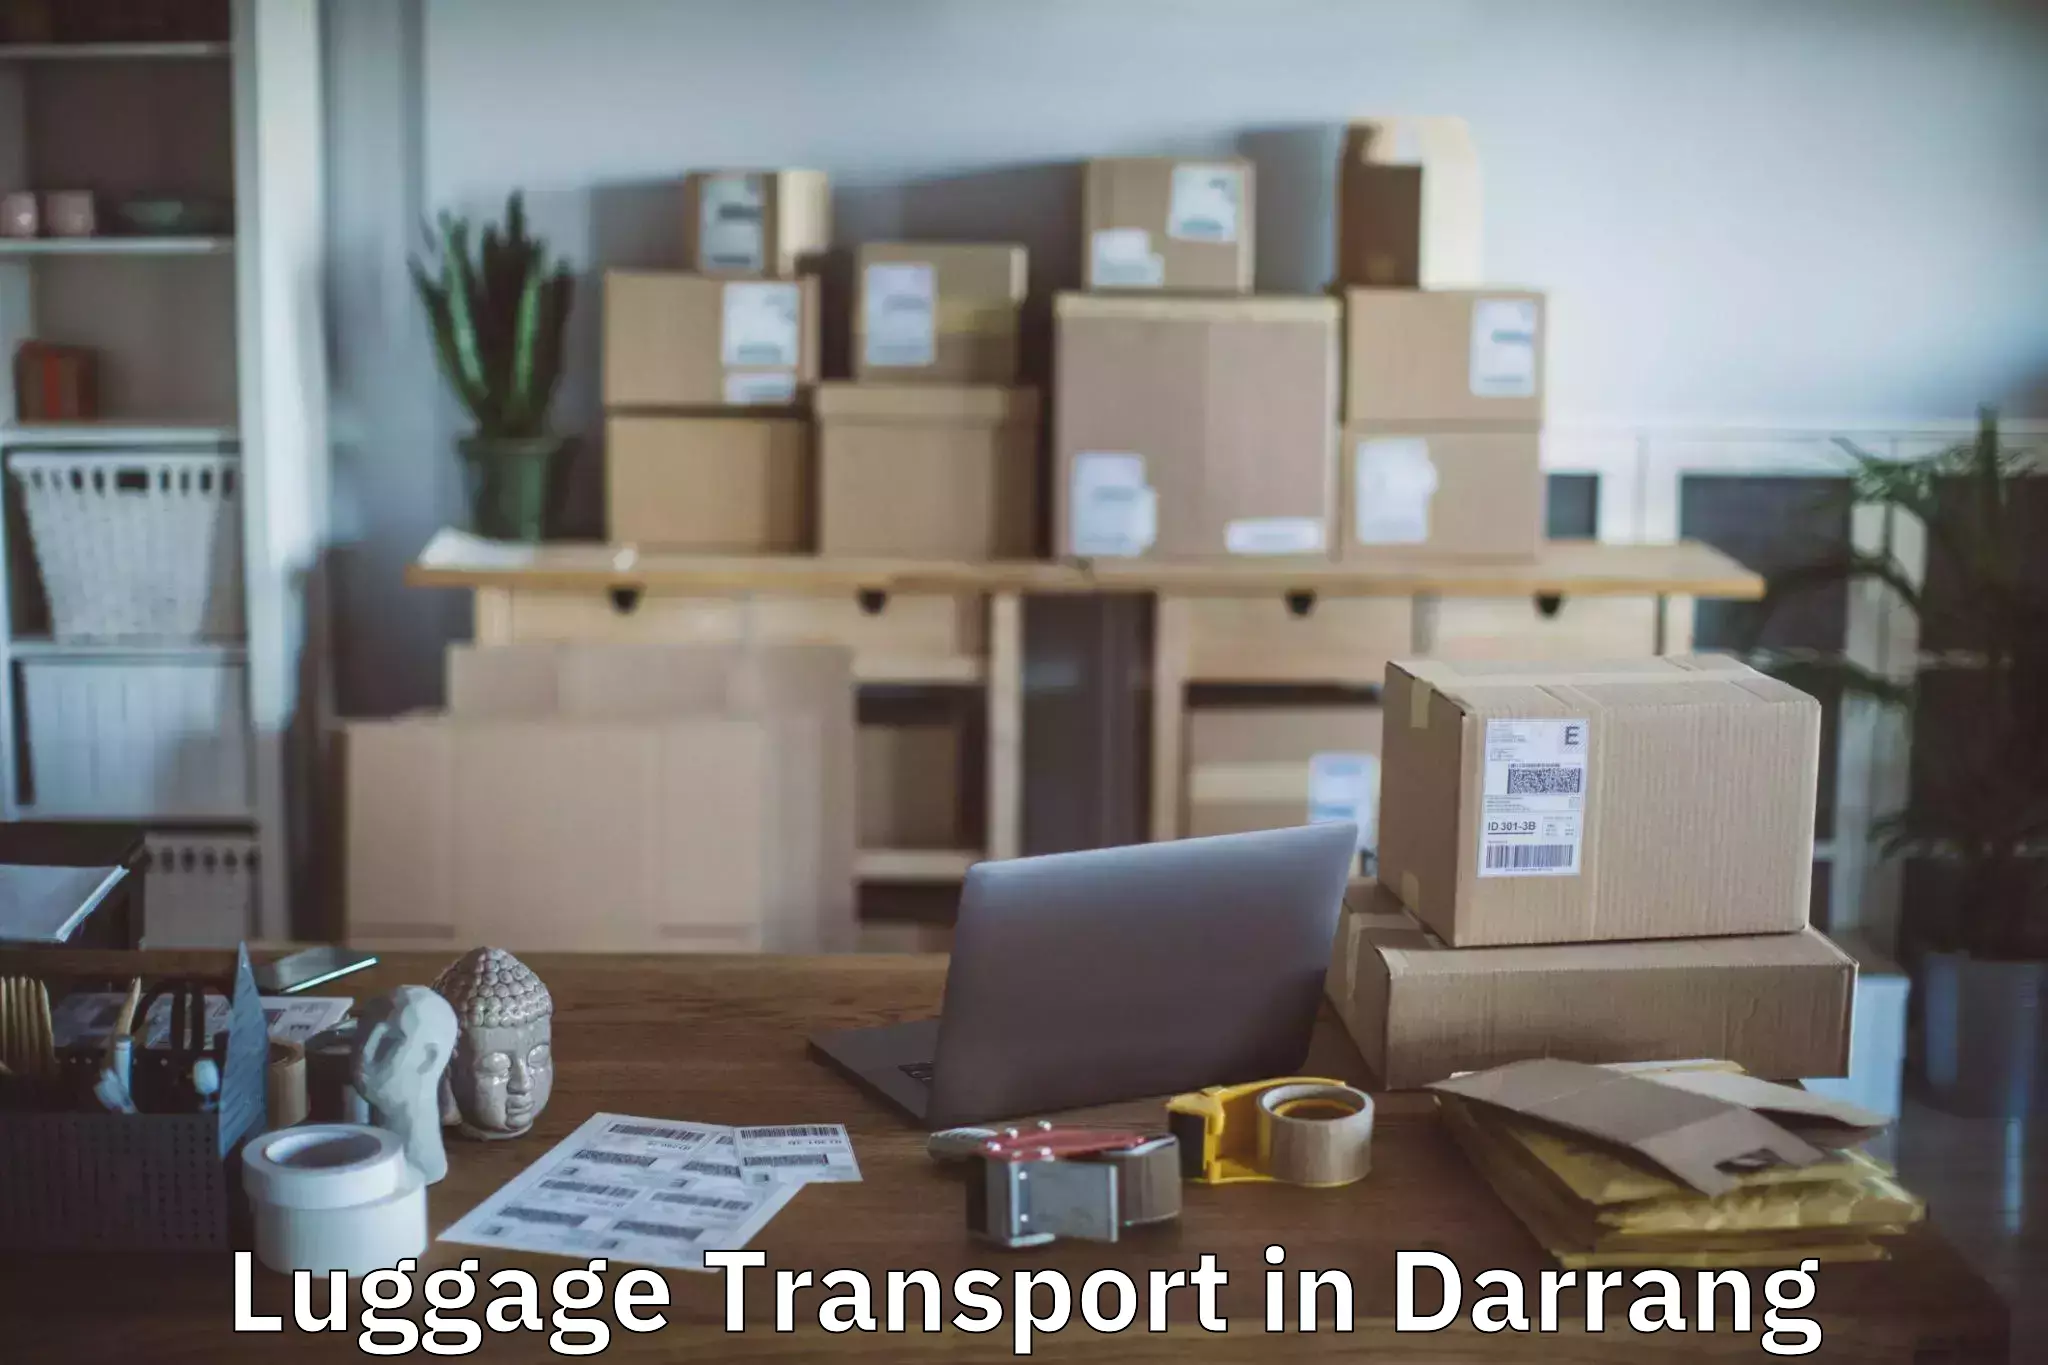 Simplified luggage transport in Darrang